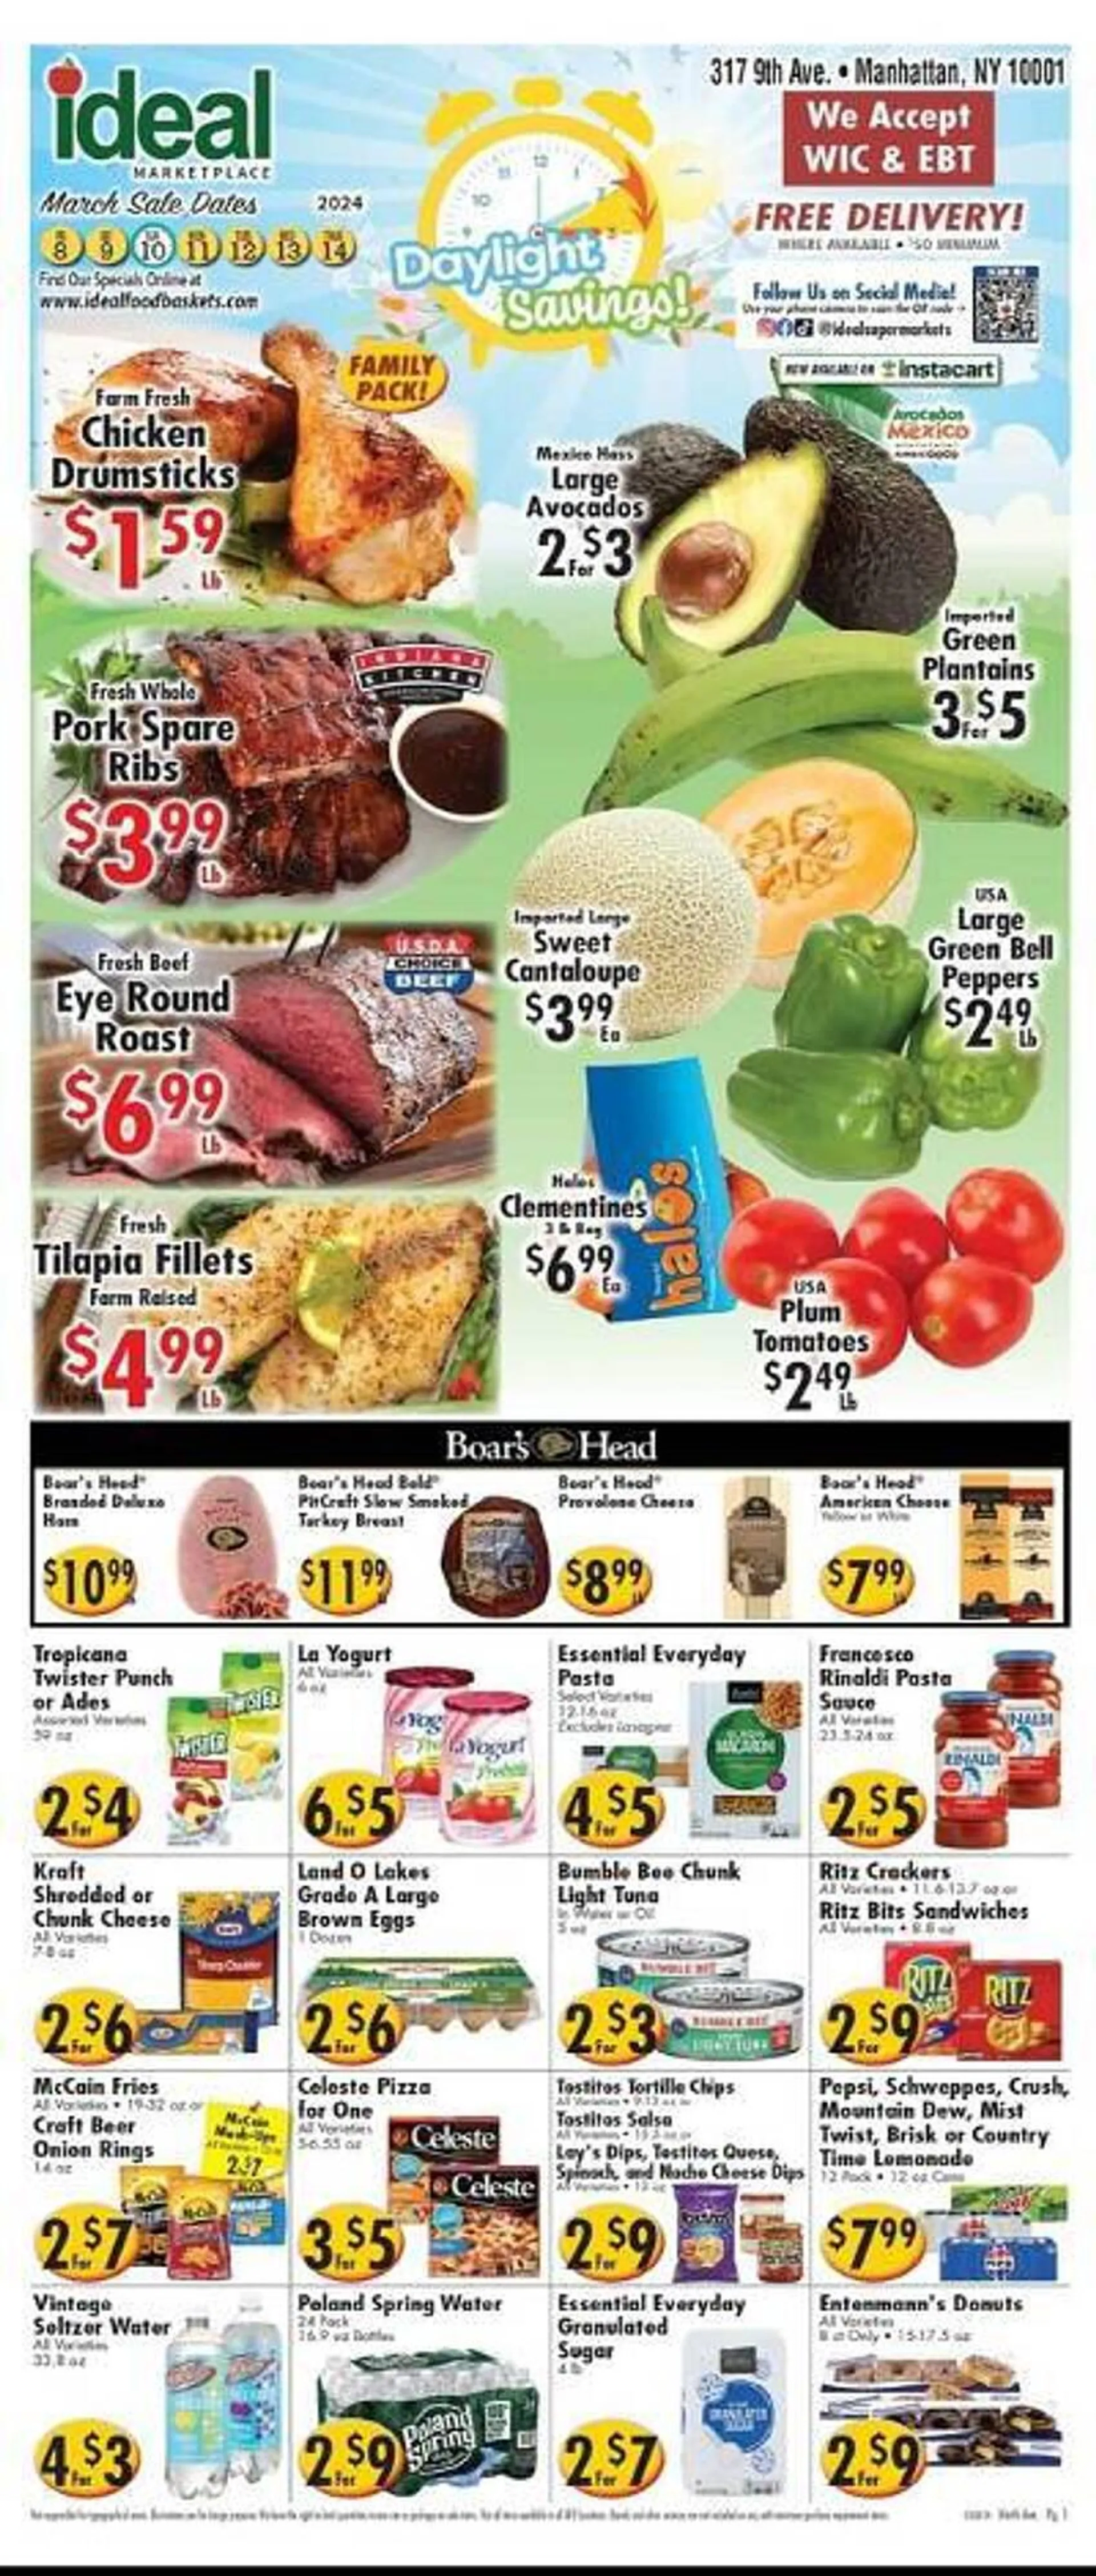 Weekly ad Ideal Food Basket Weekly Ad from March 8 to March 14 2024 - Page 